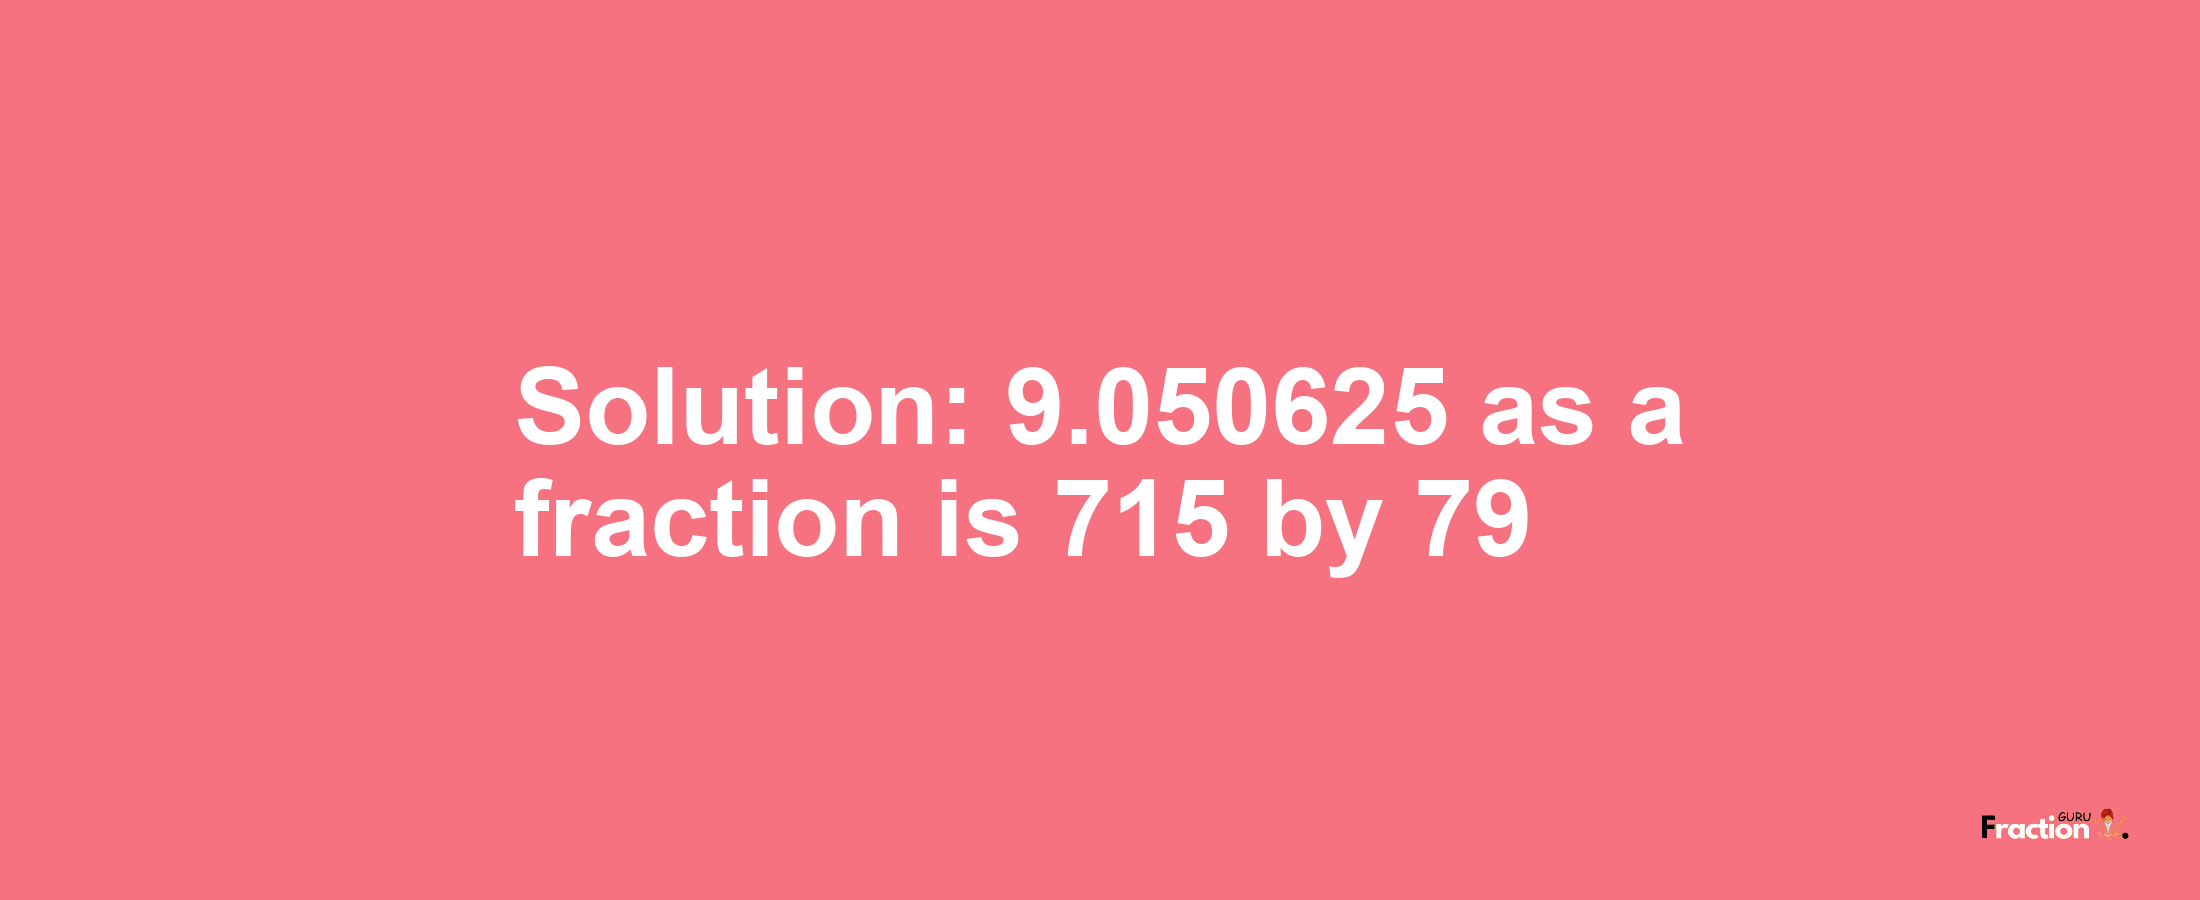 Solution:9.050625 as a fraction is 715/79